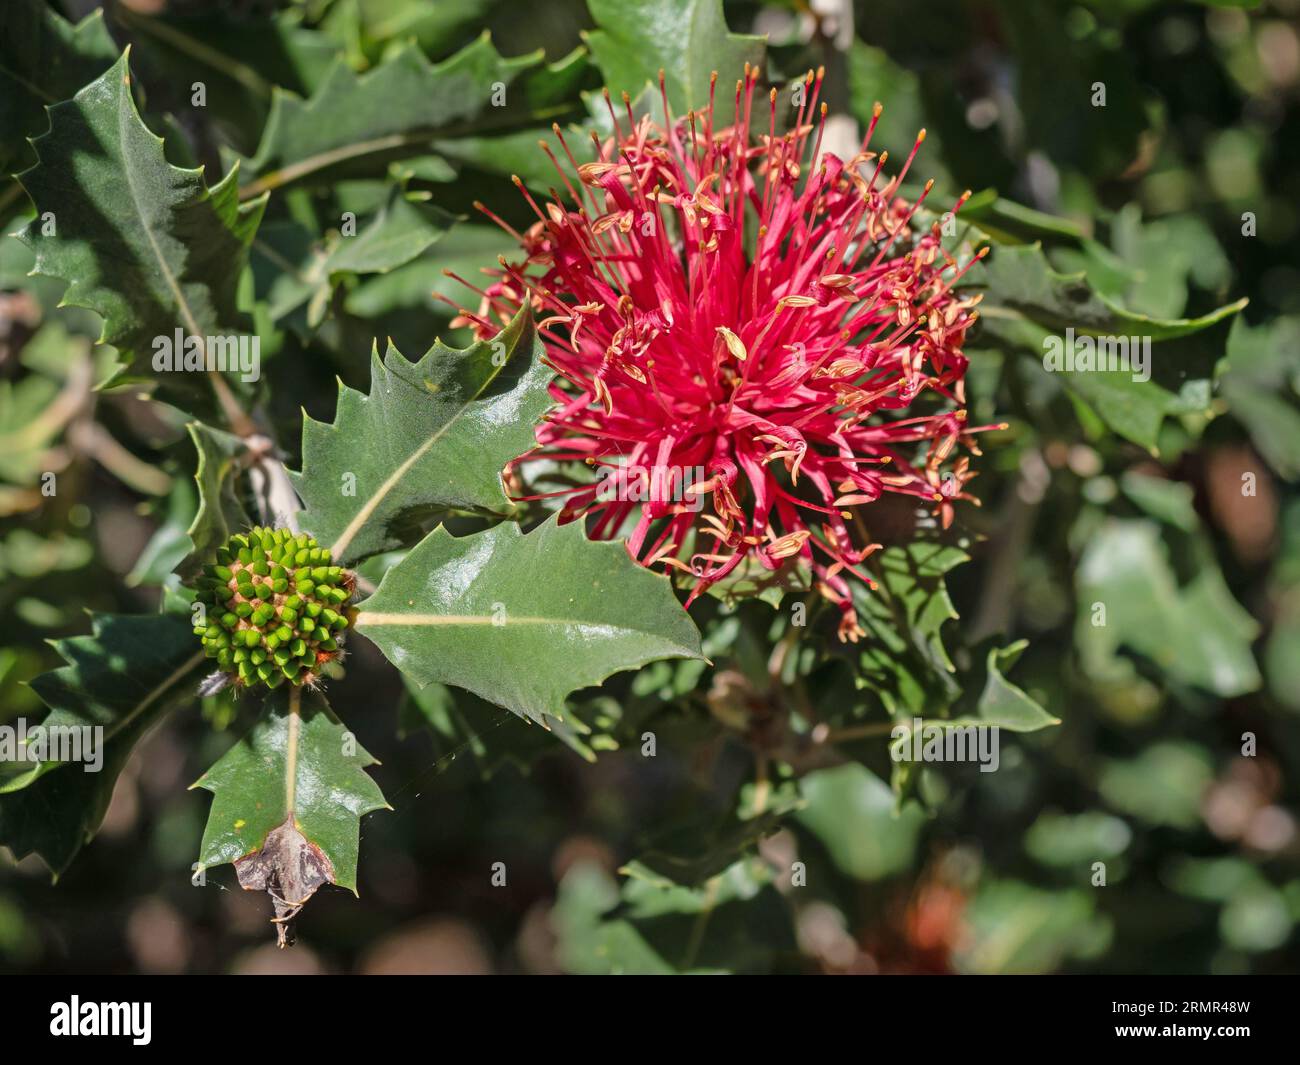 Banksia ilicifolia, commonly known as holly-leaved banksia, is a tree in the family Proteaceae. It is endemic to southwest Western Australia. Stock Photo